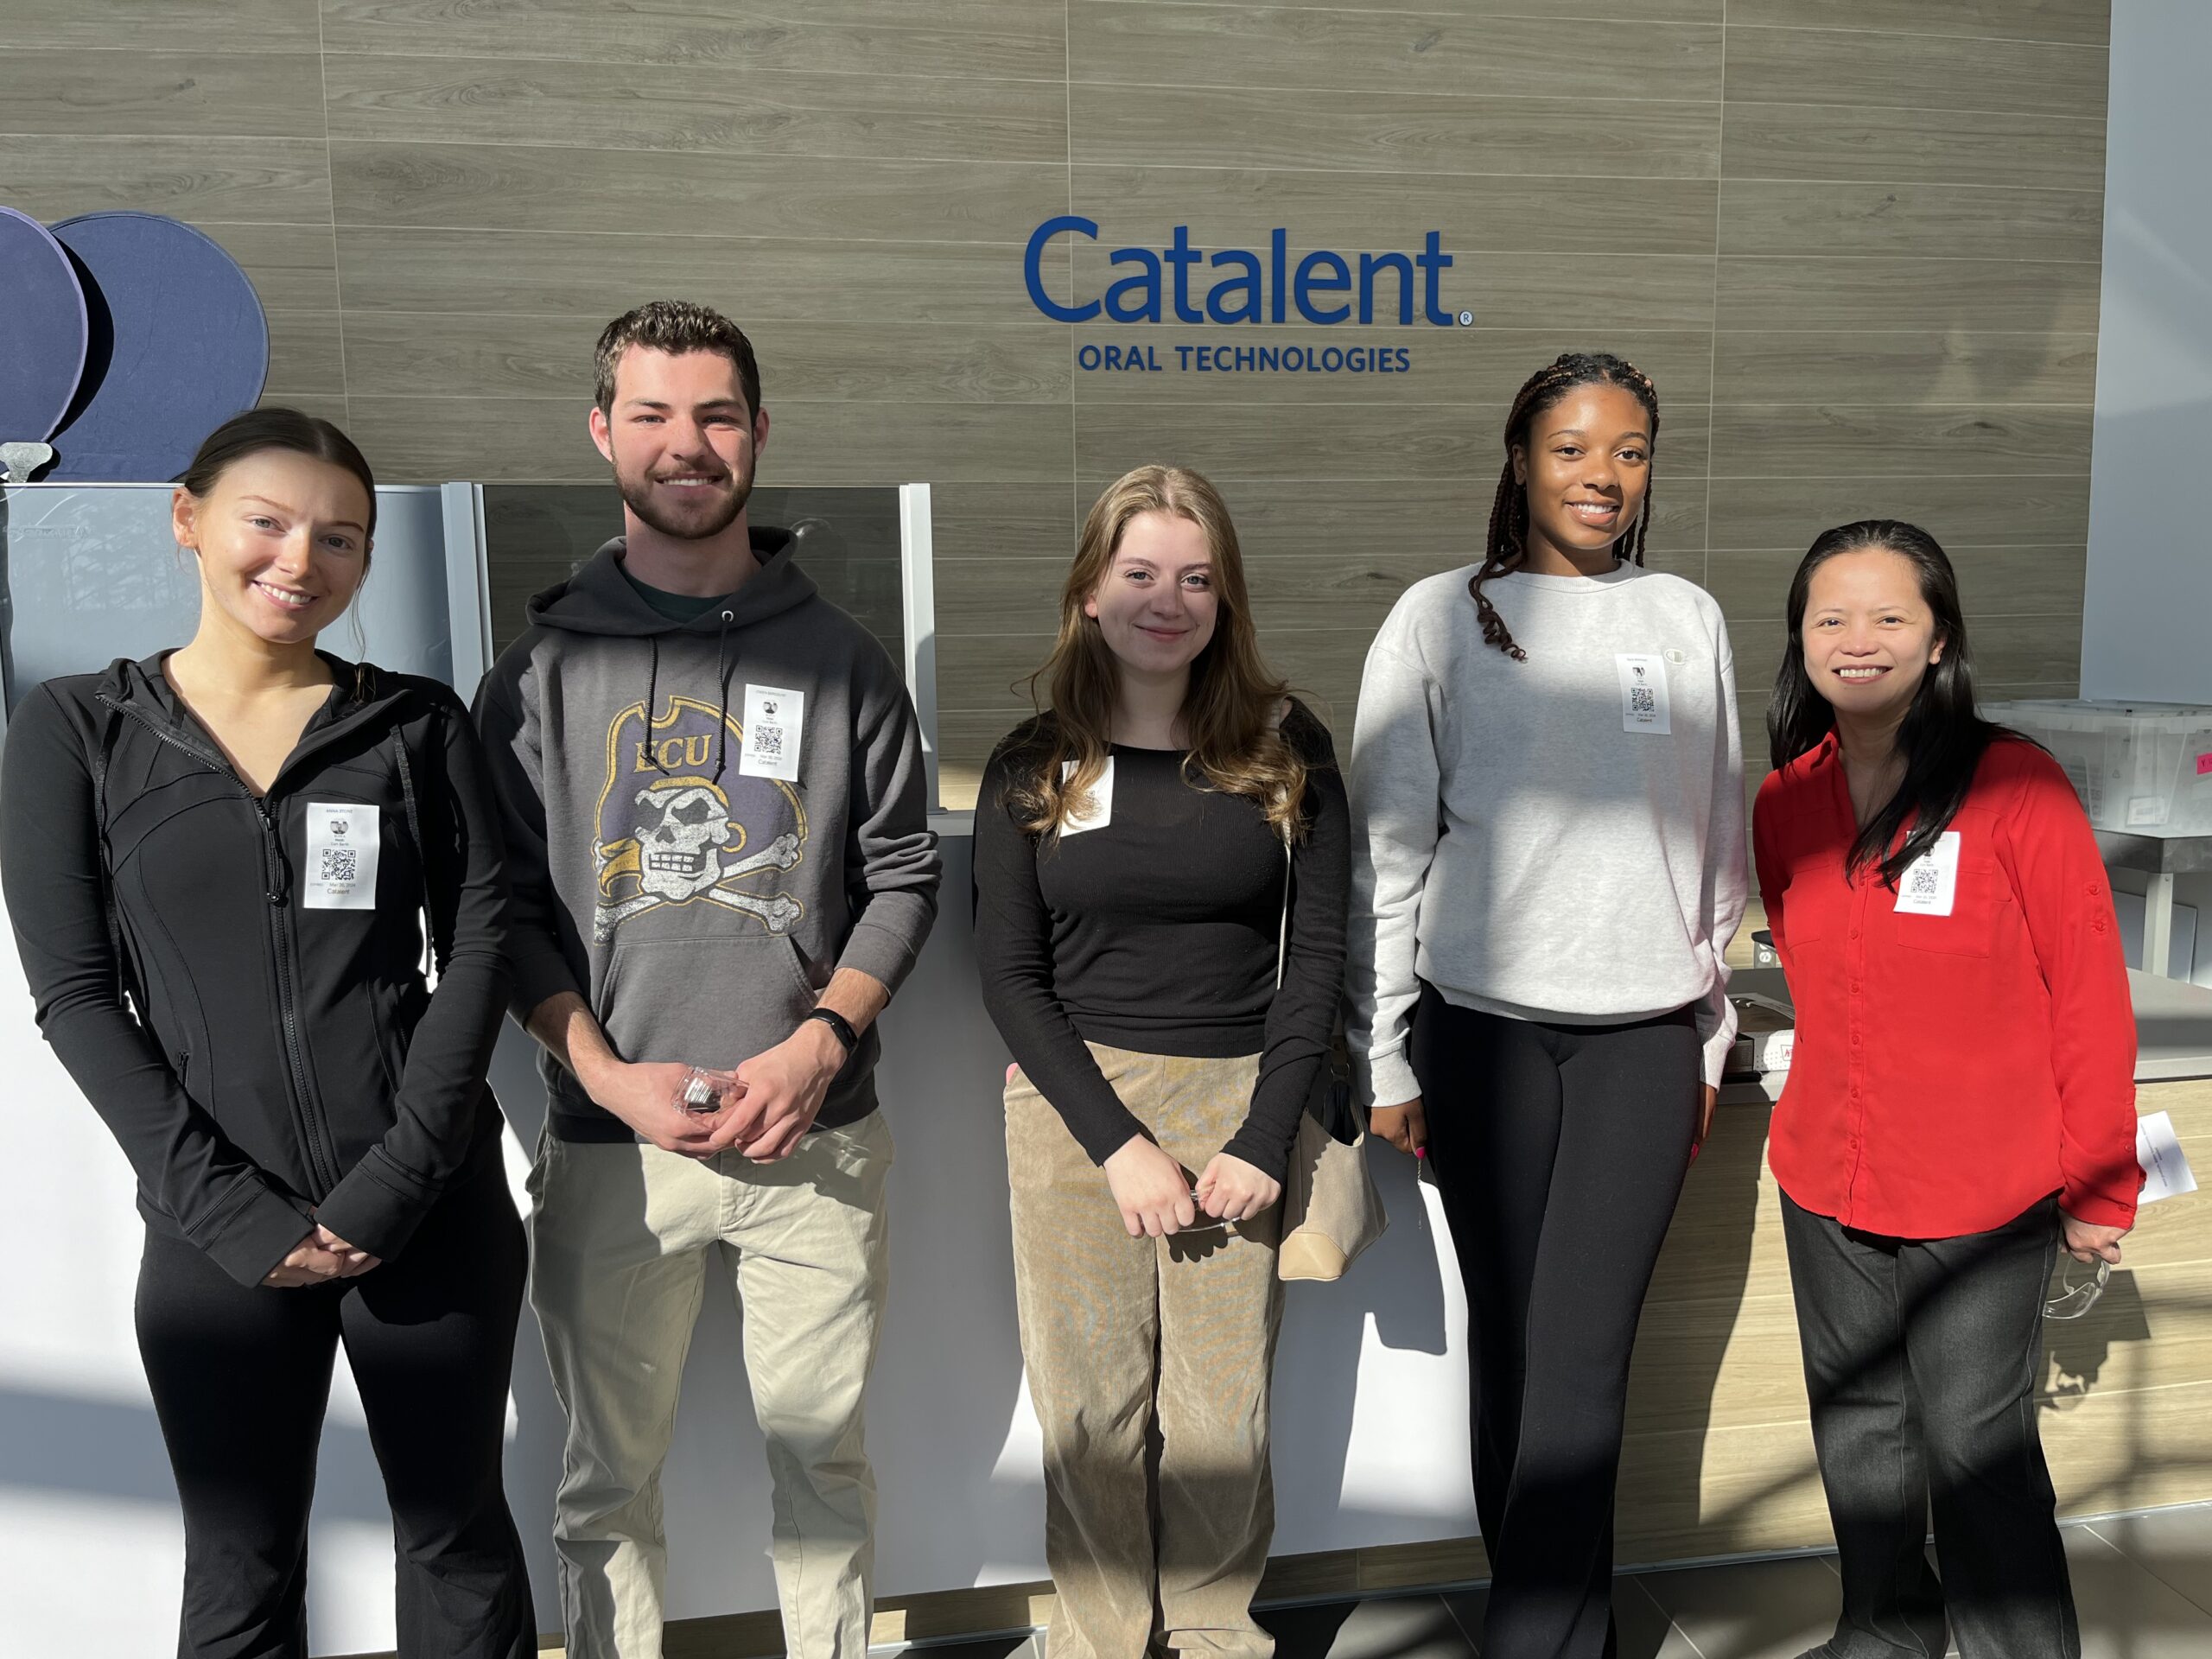 You are currently viewing ECU Environmental Health Students at Catalent for Site Tour